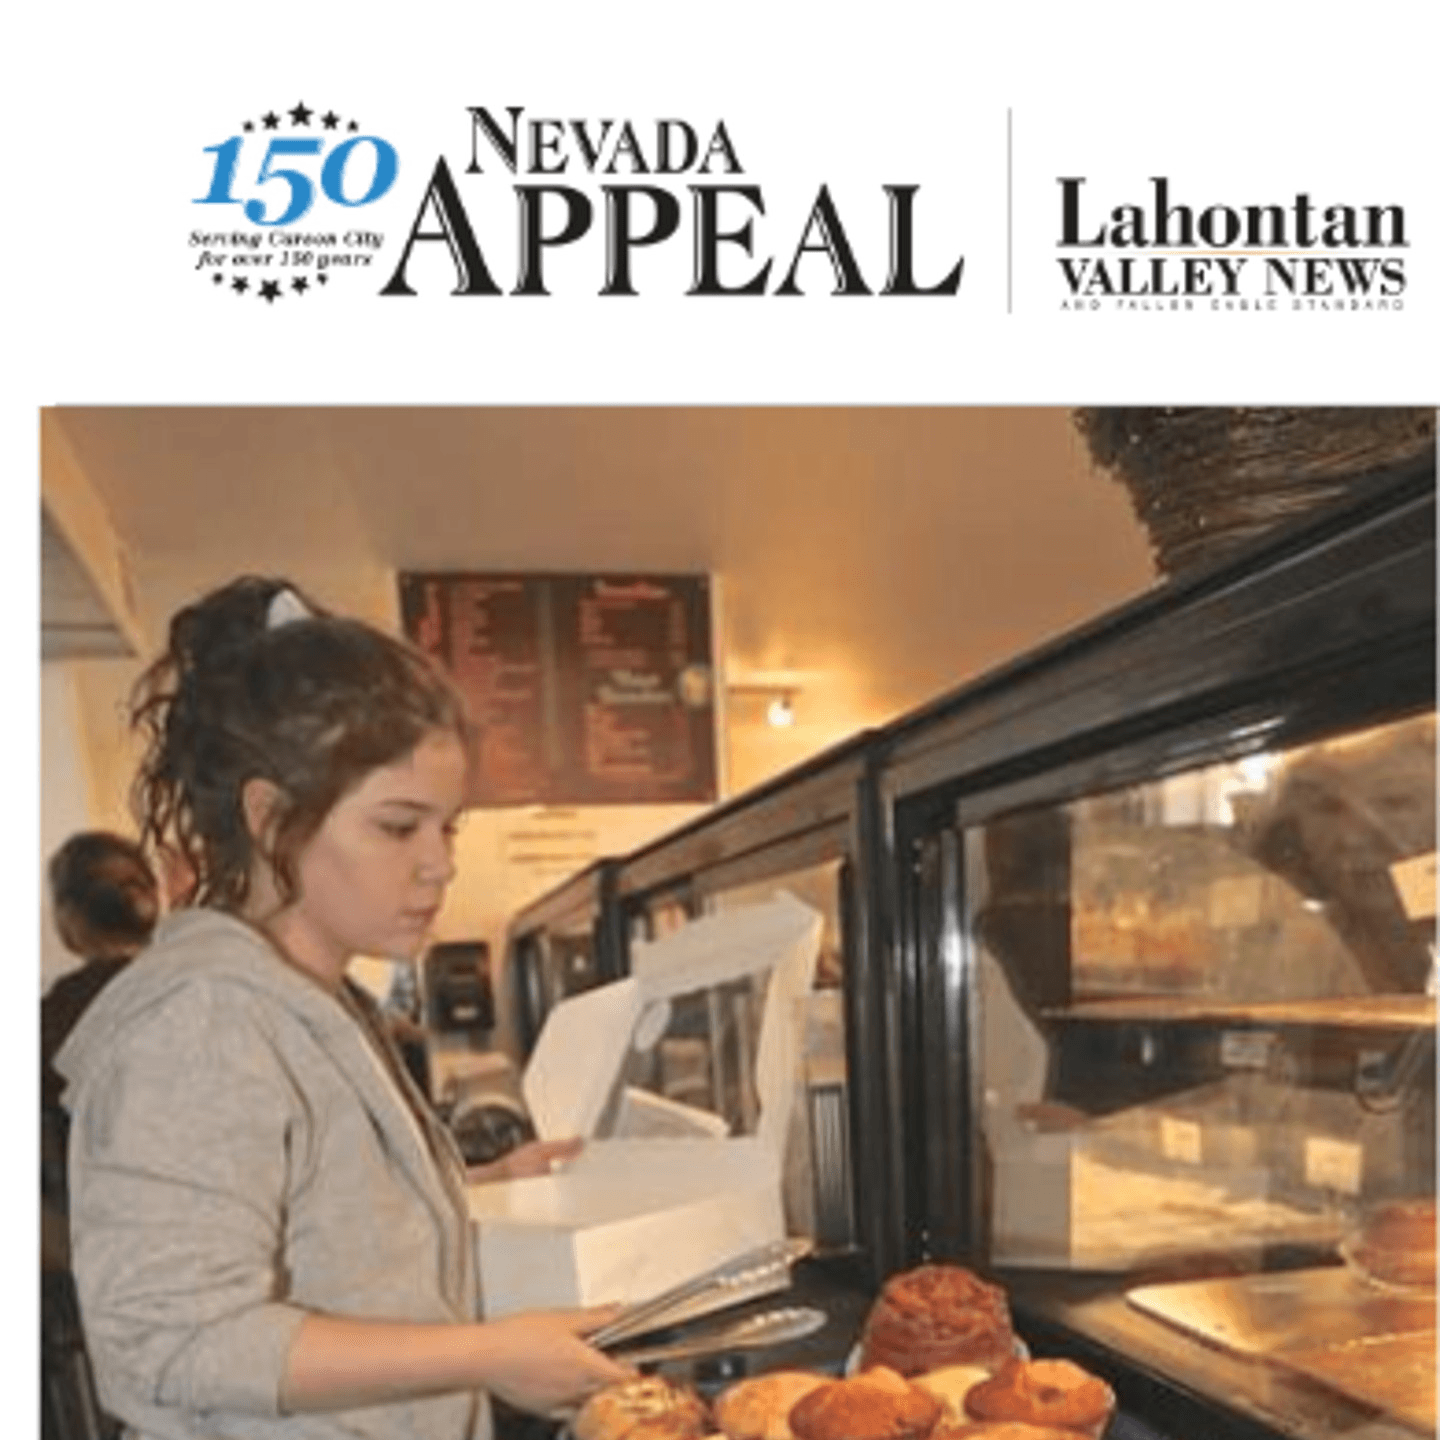 Carson City’s L.A. Bakery prepares for expansion